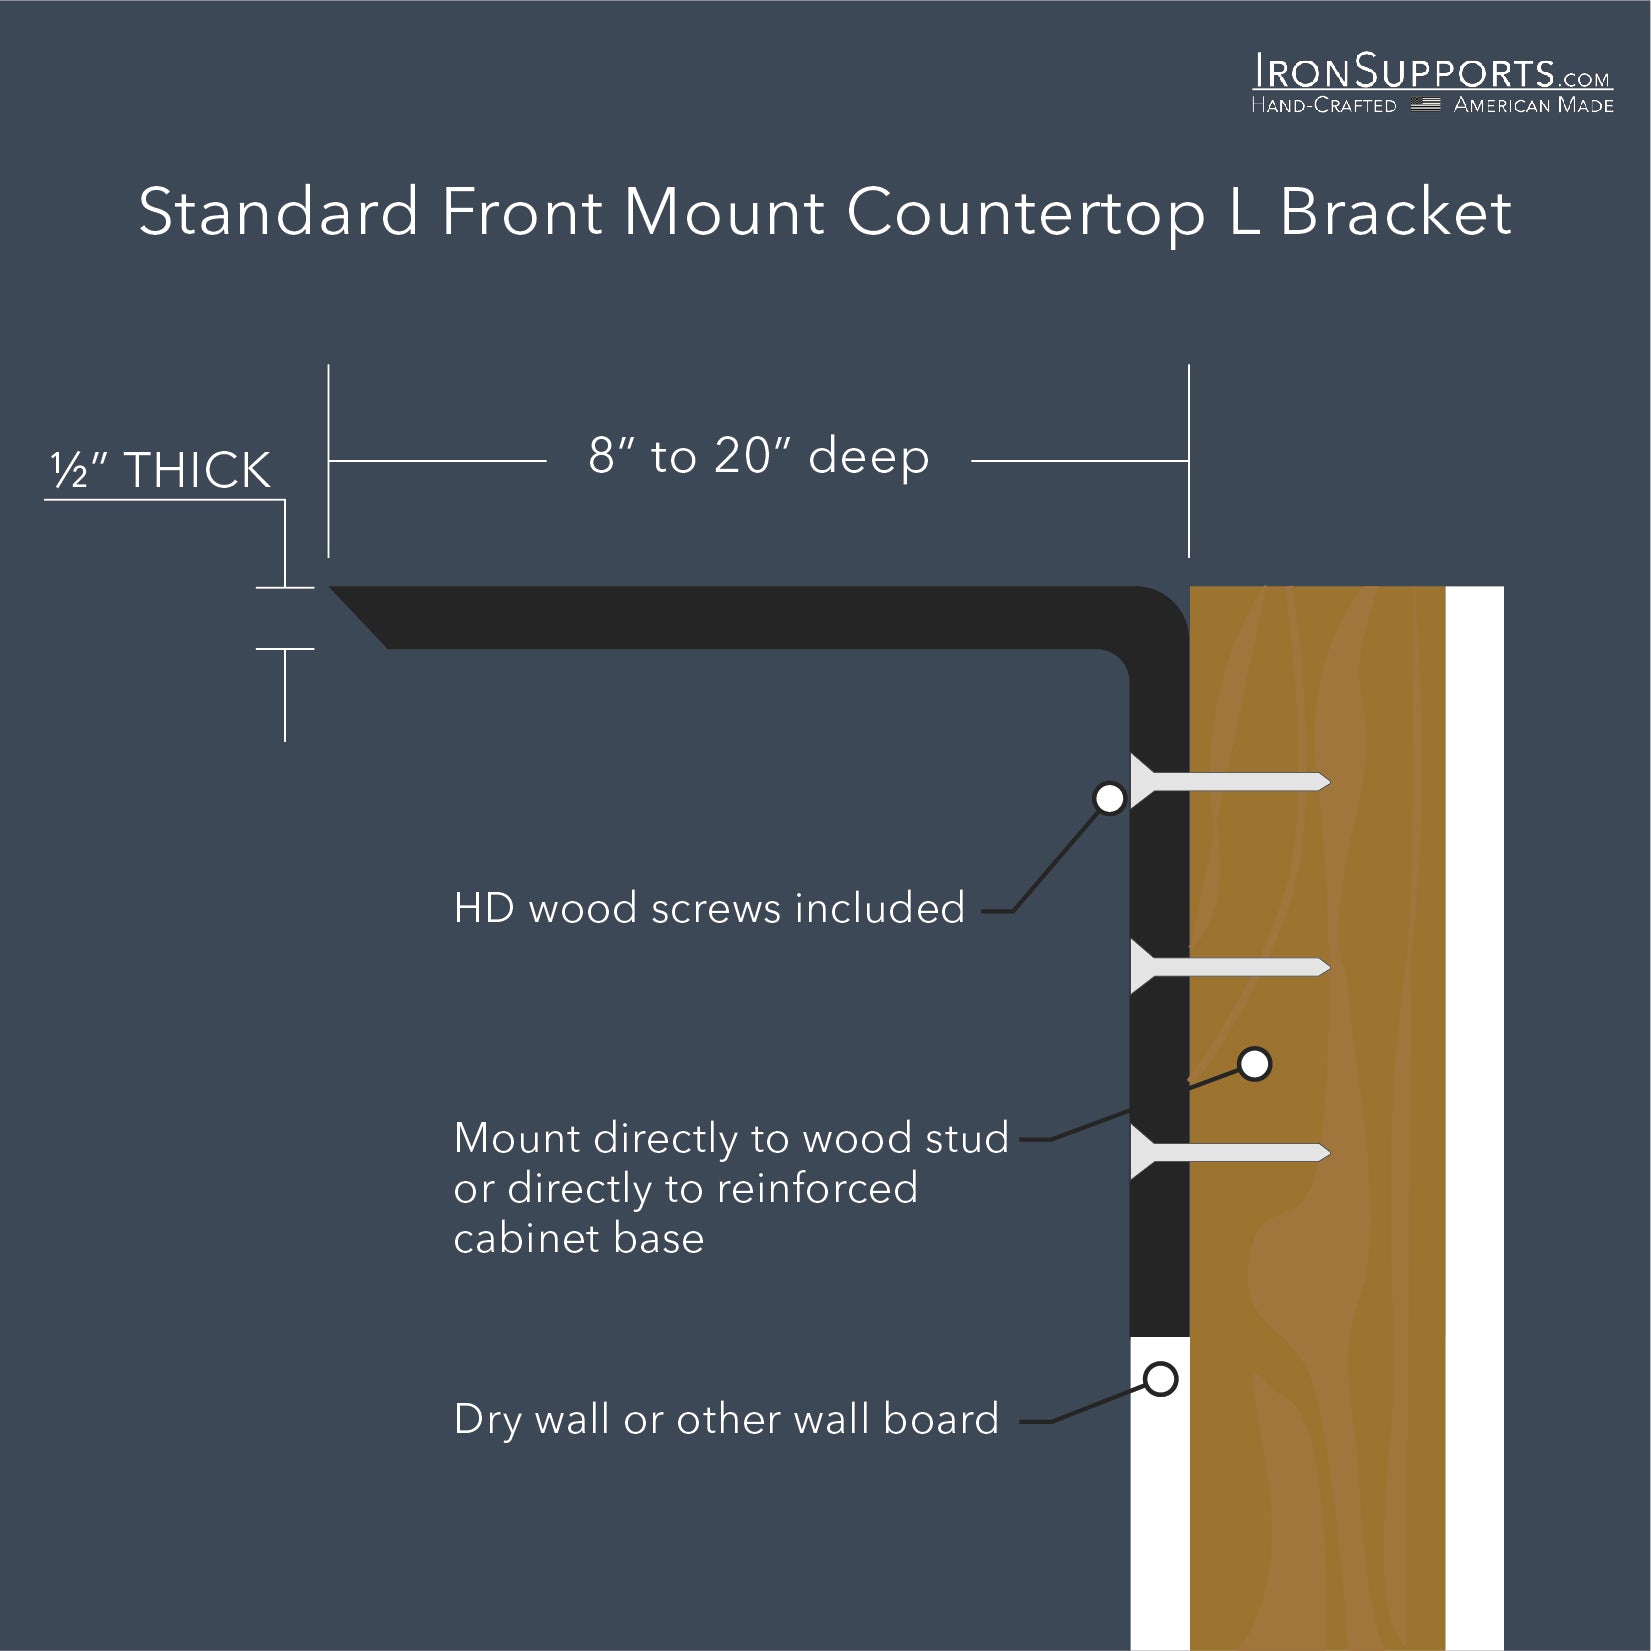 Standard Front Mount Countertop L Bracket sizes (8" x 6" to 20" x 14") and sturdy 1/2" thickness. Perfect support for countertops, shelves, desks, and more.